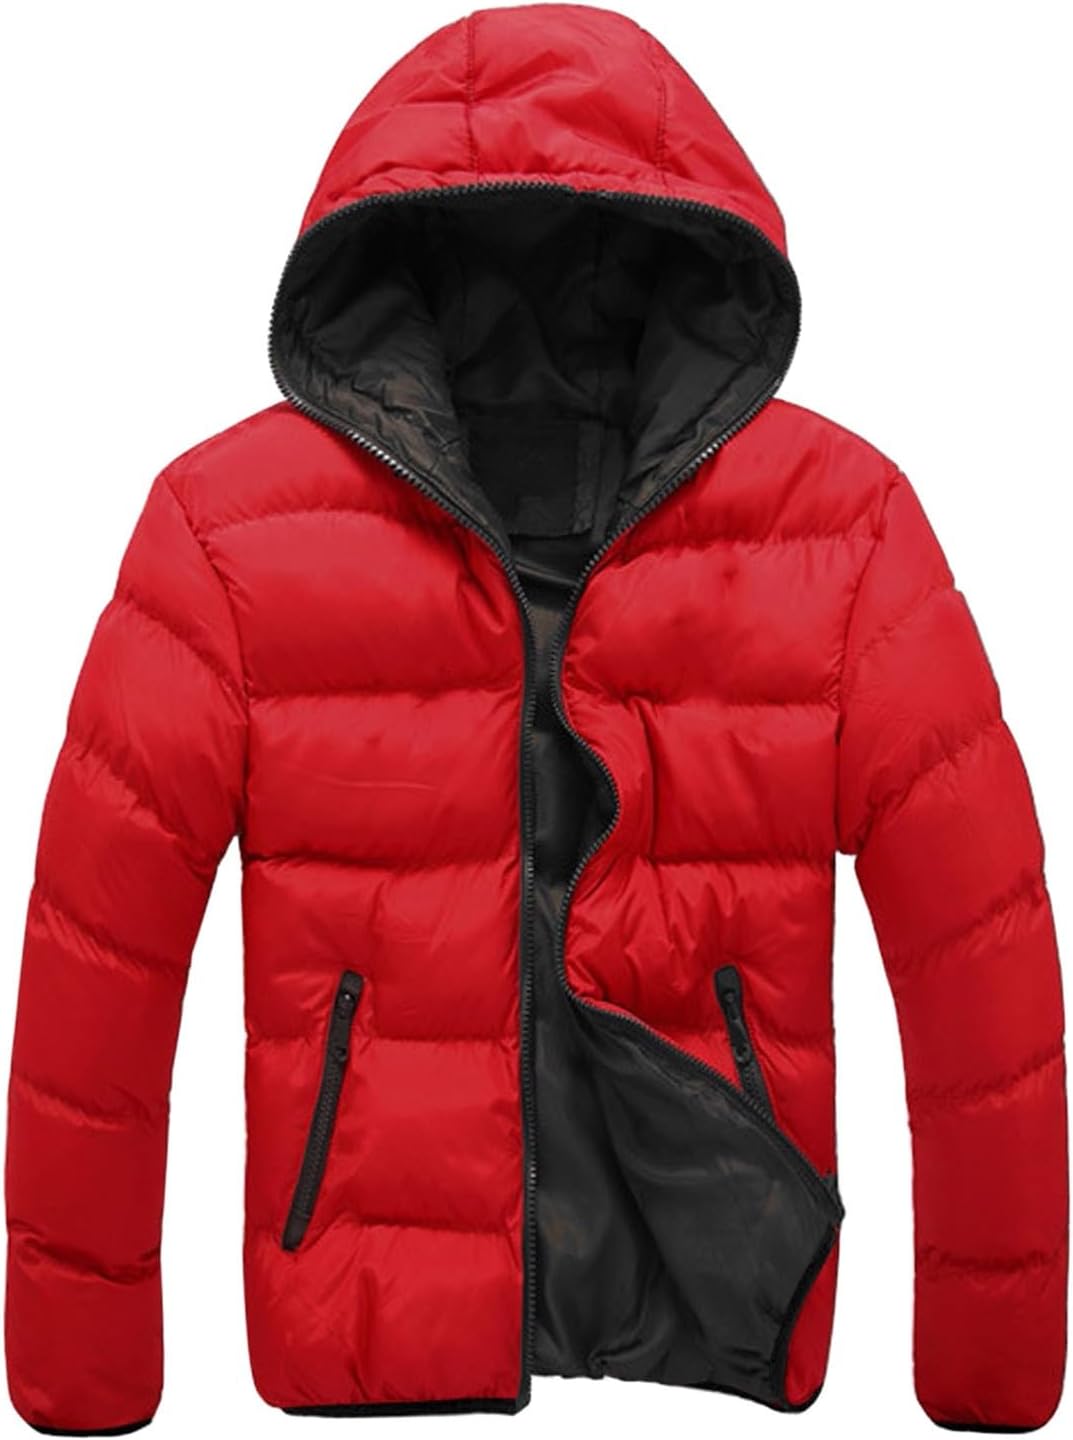 Men Puffer Jacket with Hood Lightweight Packable Quilted Hooded Bubble Down Jackets Winter Insulated Thick Outwear